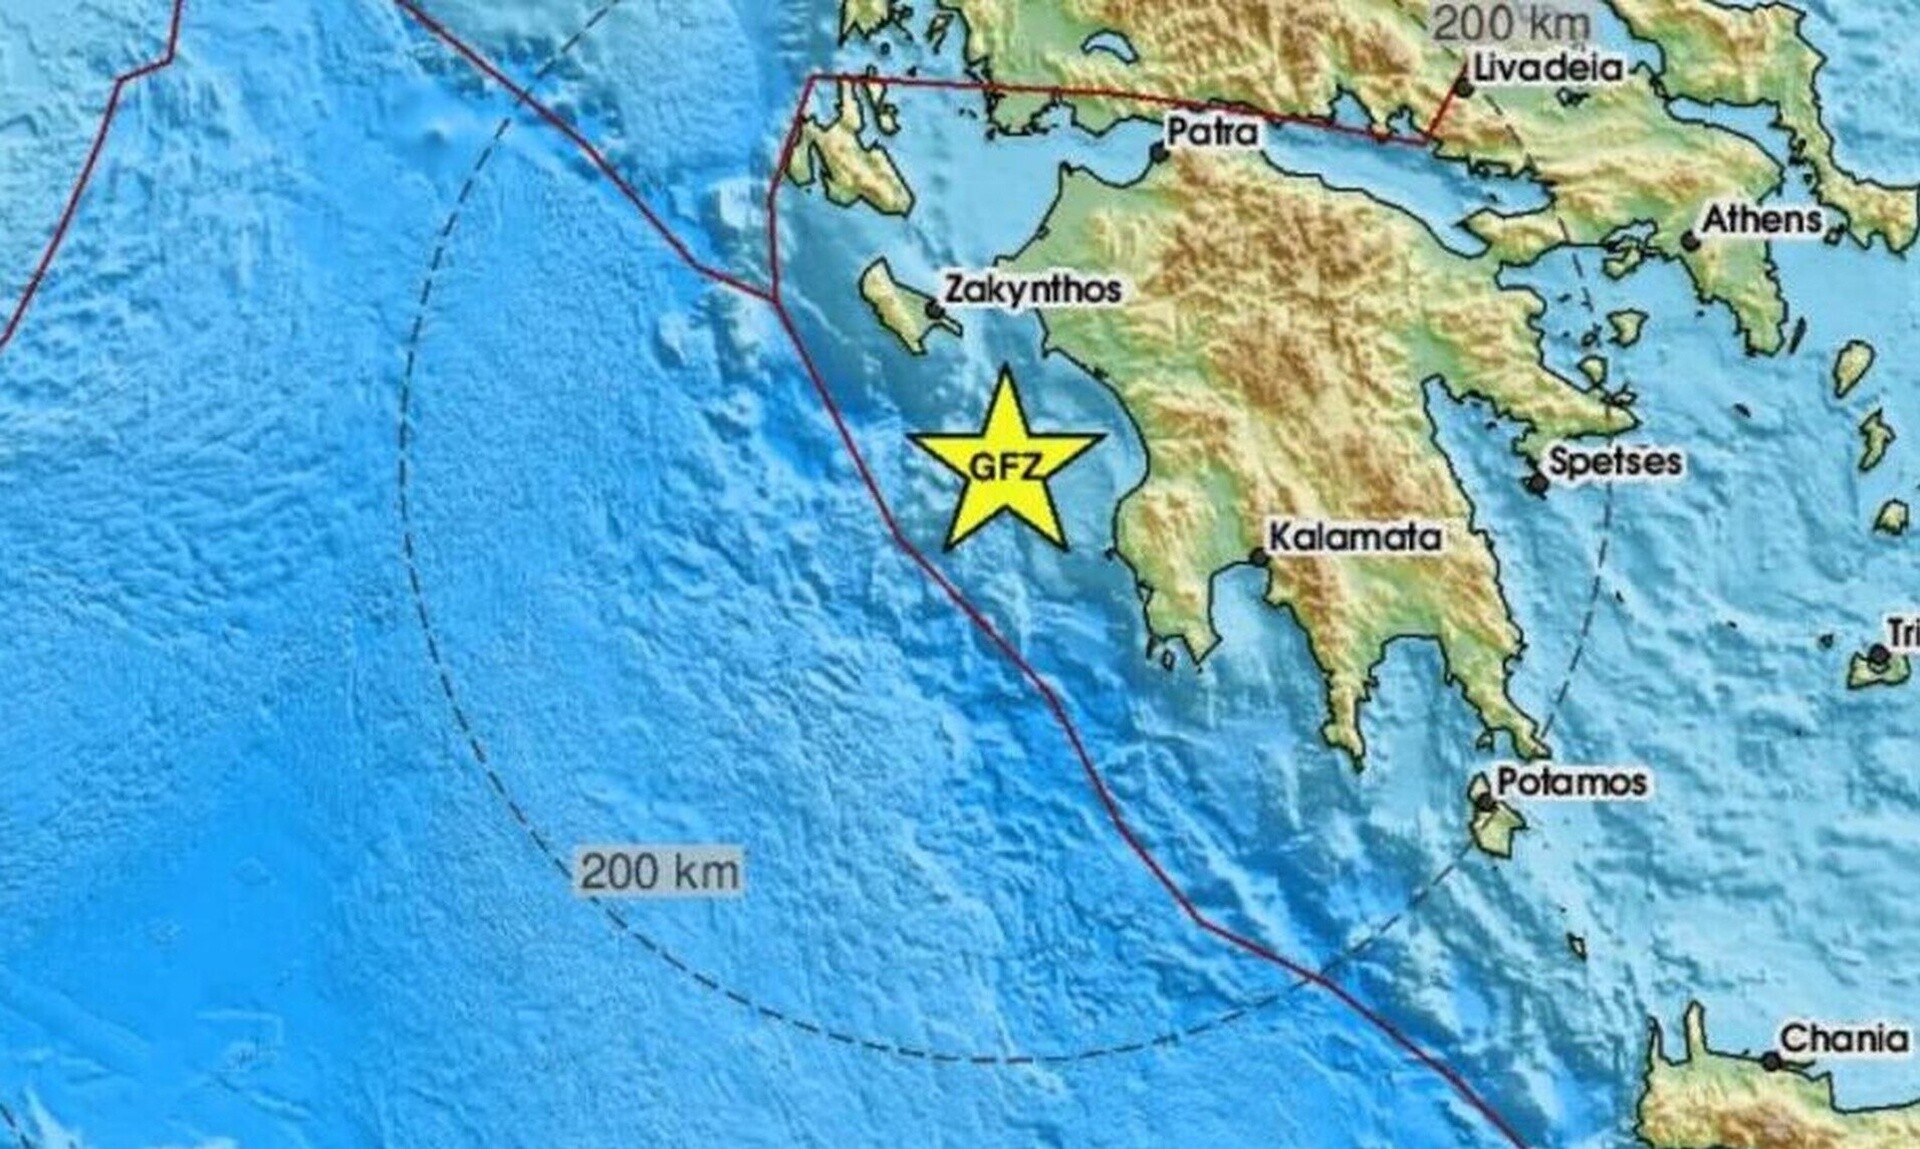 Two earthquakes measuring 5.6 and 5.7 on the Richter scale off Ilia